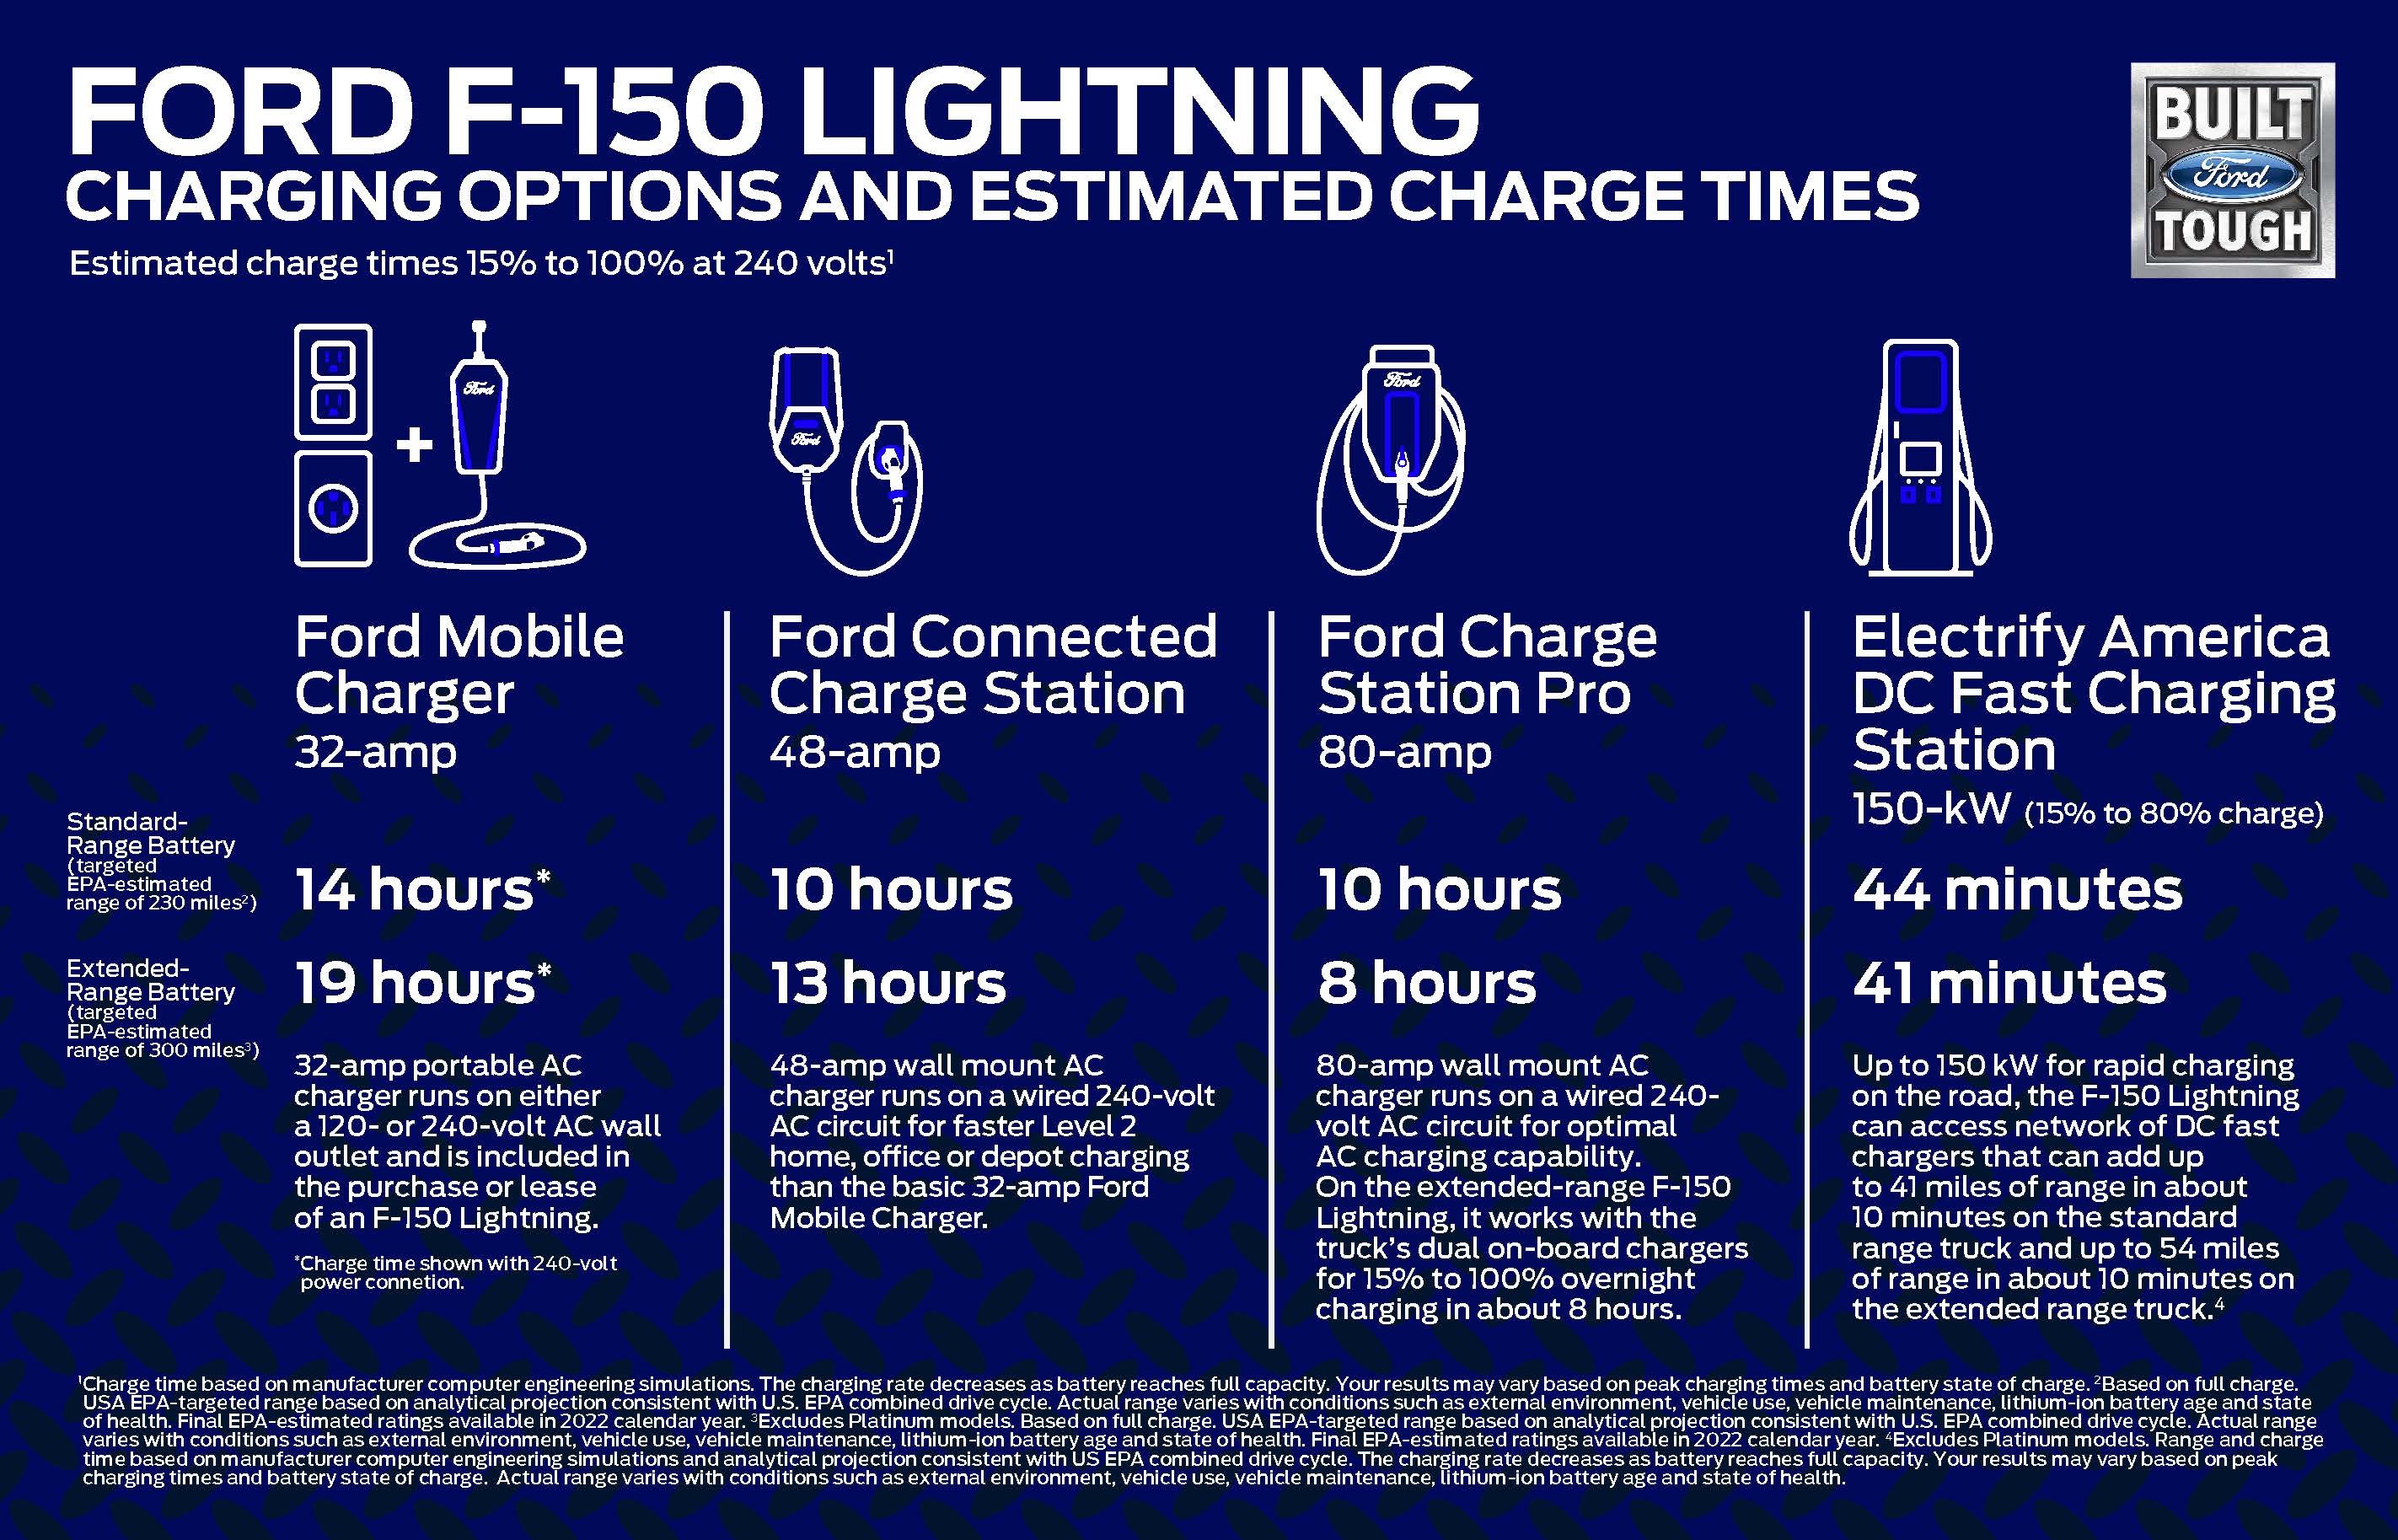 Charging-Options-and-Estimated-Charge-Times.jpg